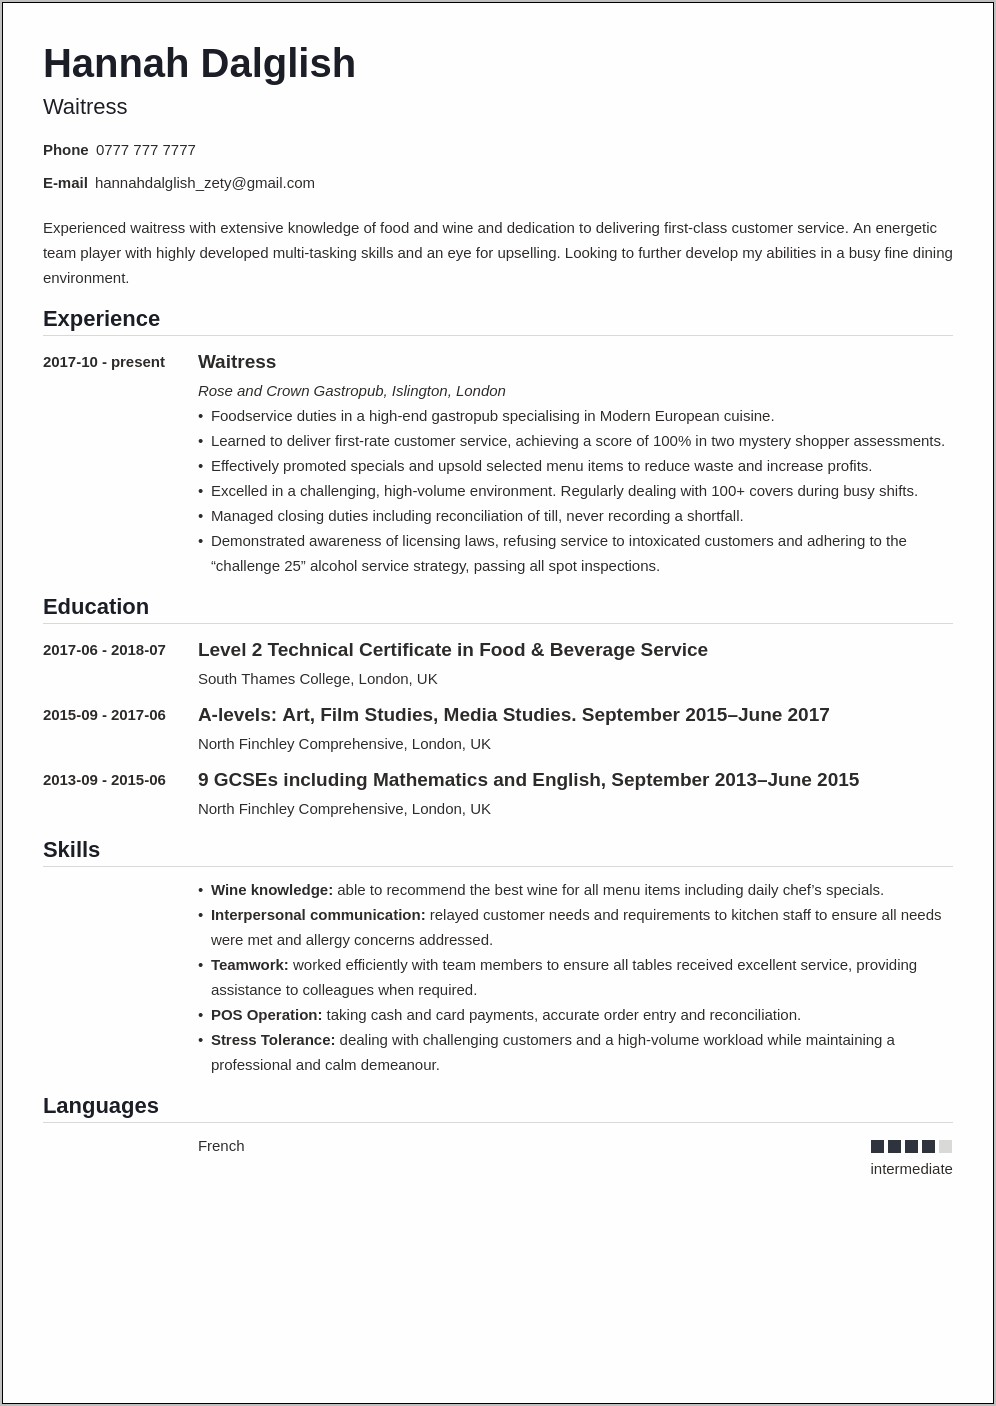 Resume Work Experience Waitress Examples